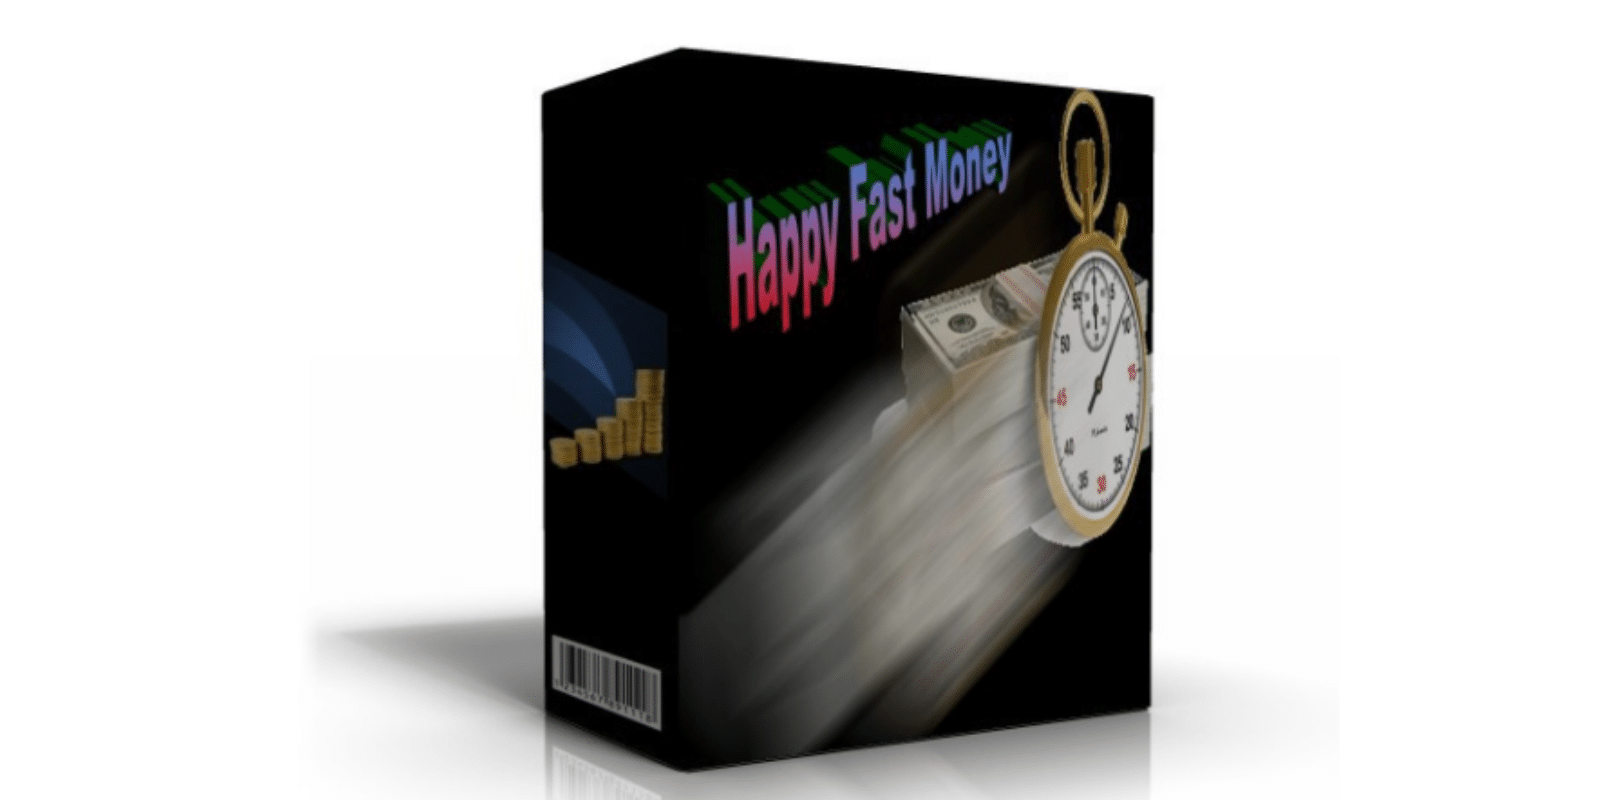 Happy Fast Money Review 2 1600x800 